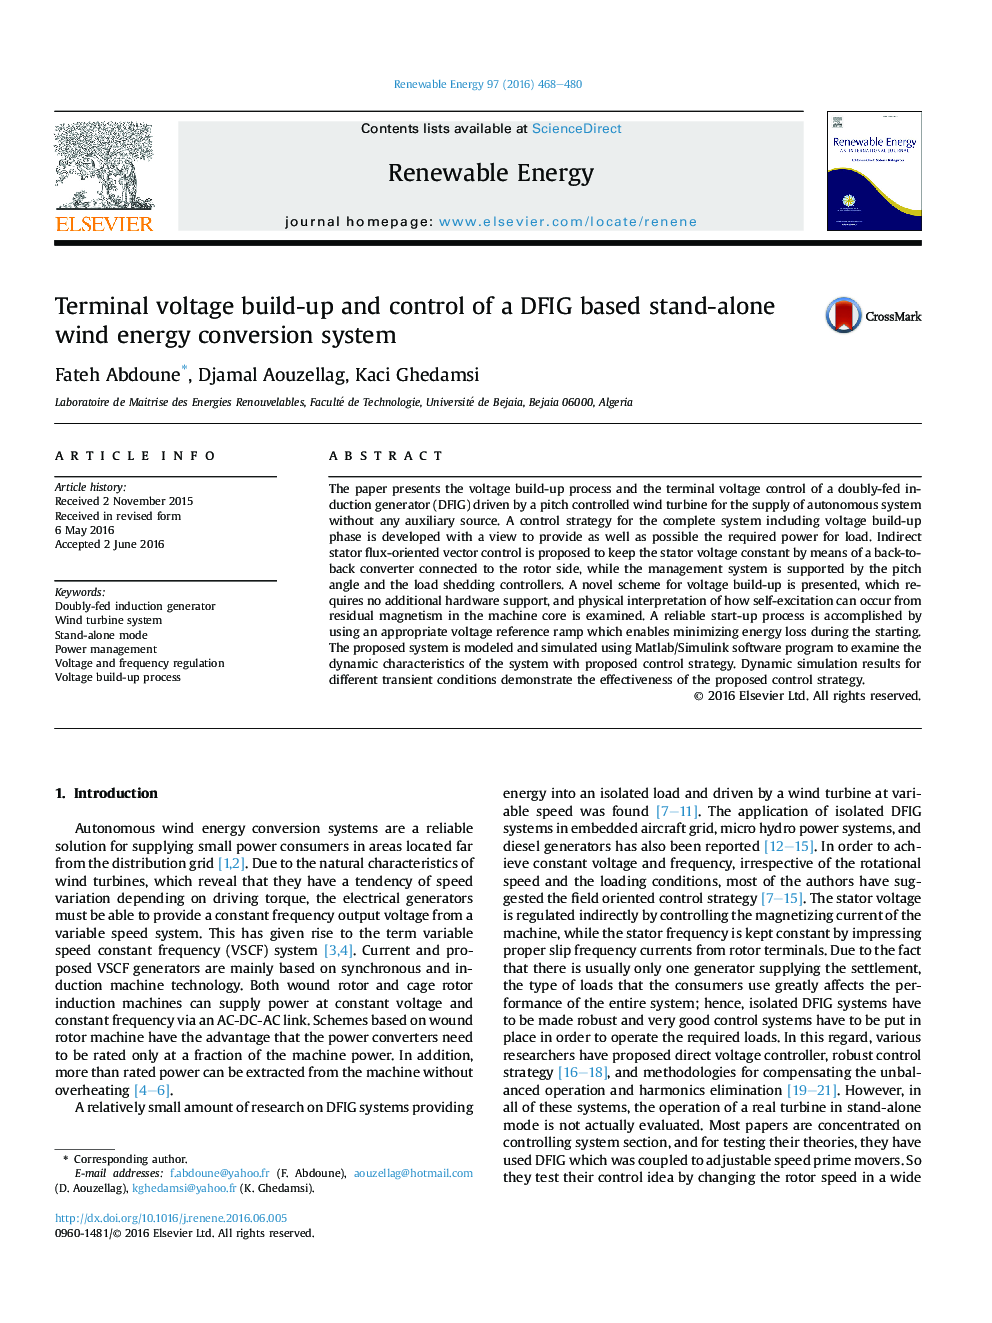 Terminal voltage build-up and control of a DFIG based stand-alone wind energy conversion system